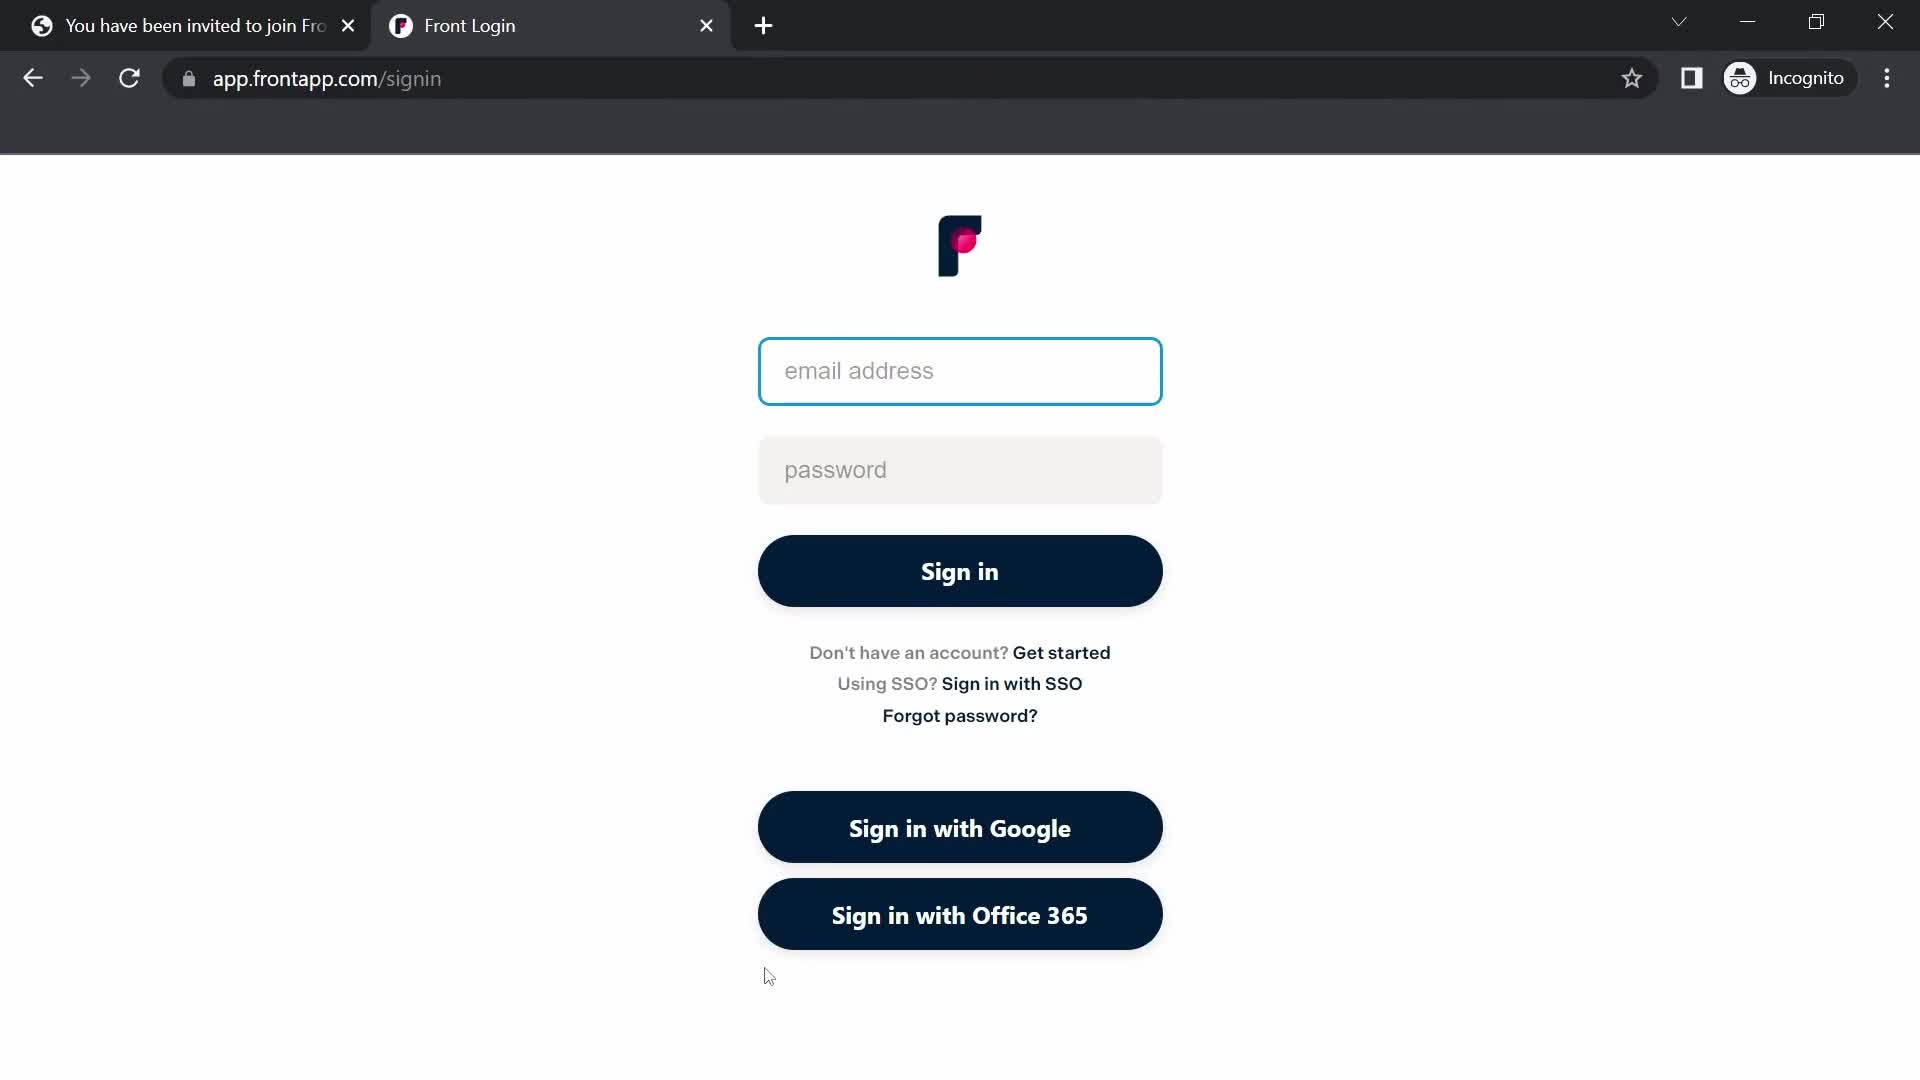 Screenshot of Sign in on Accepting an invite on Front user flow